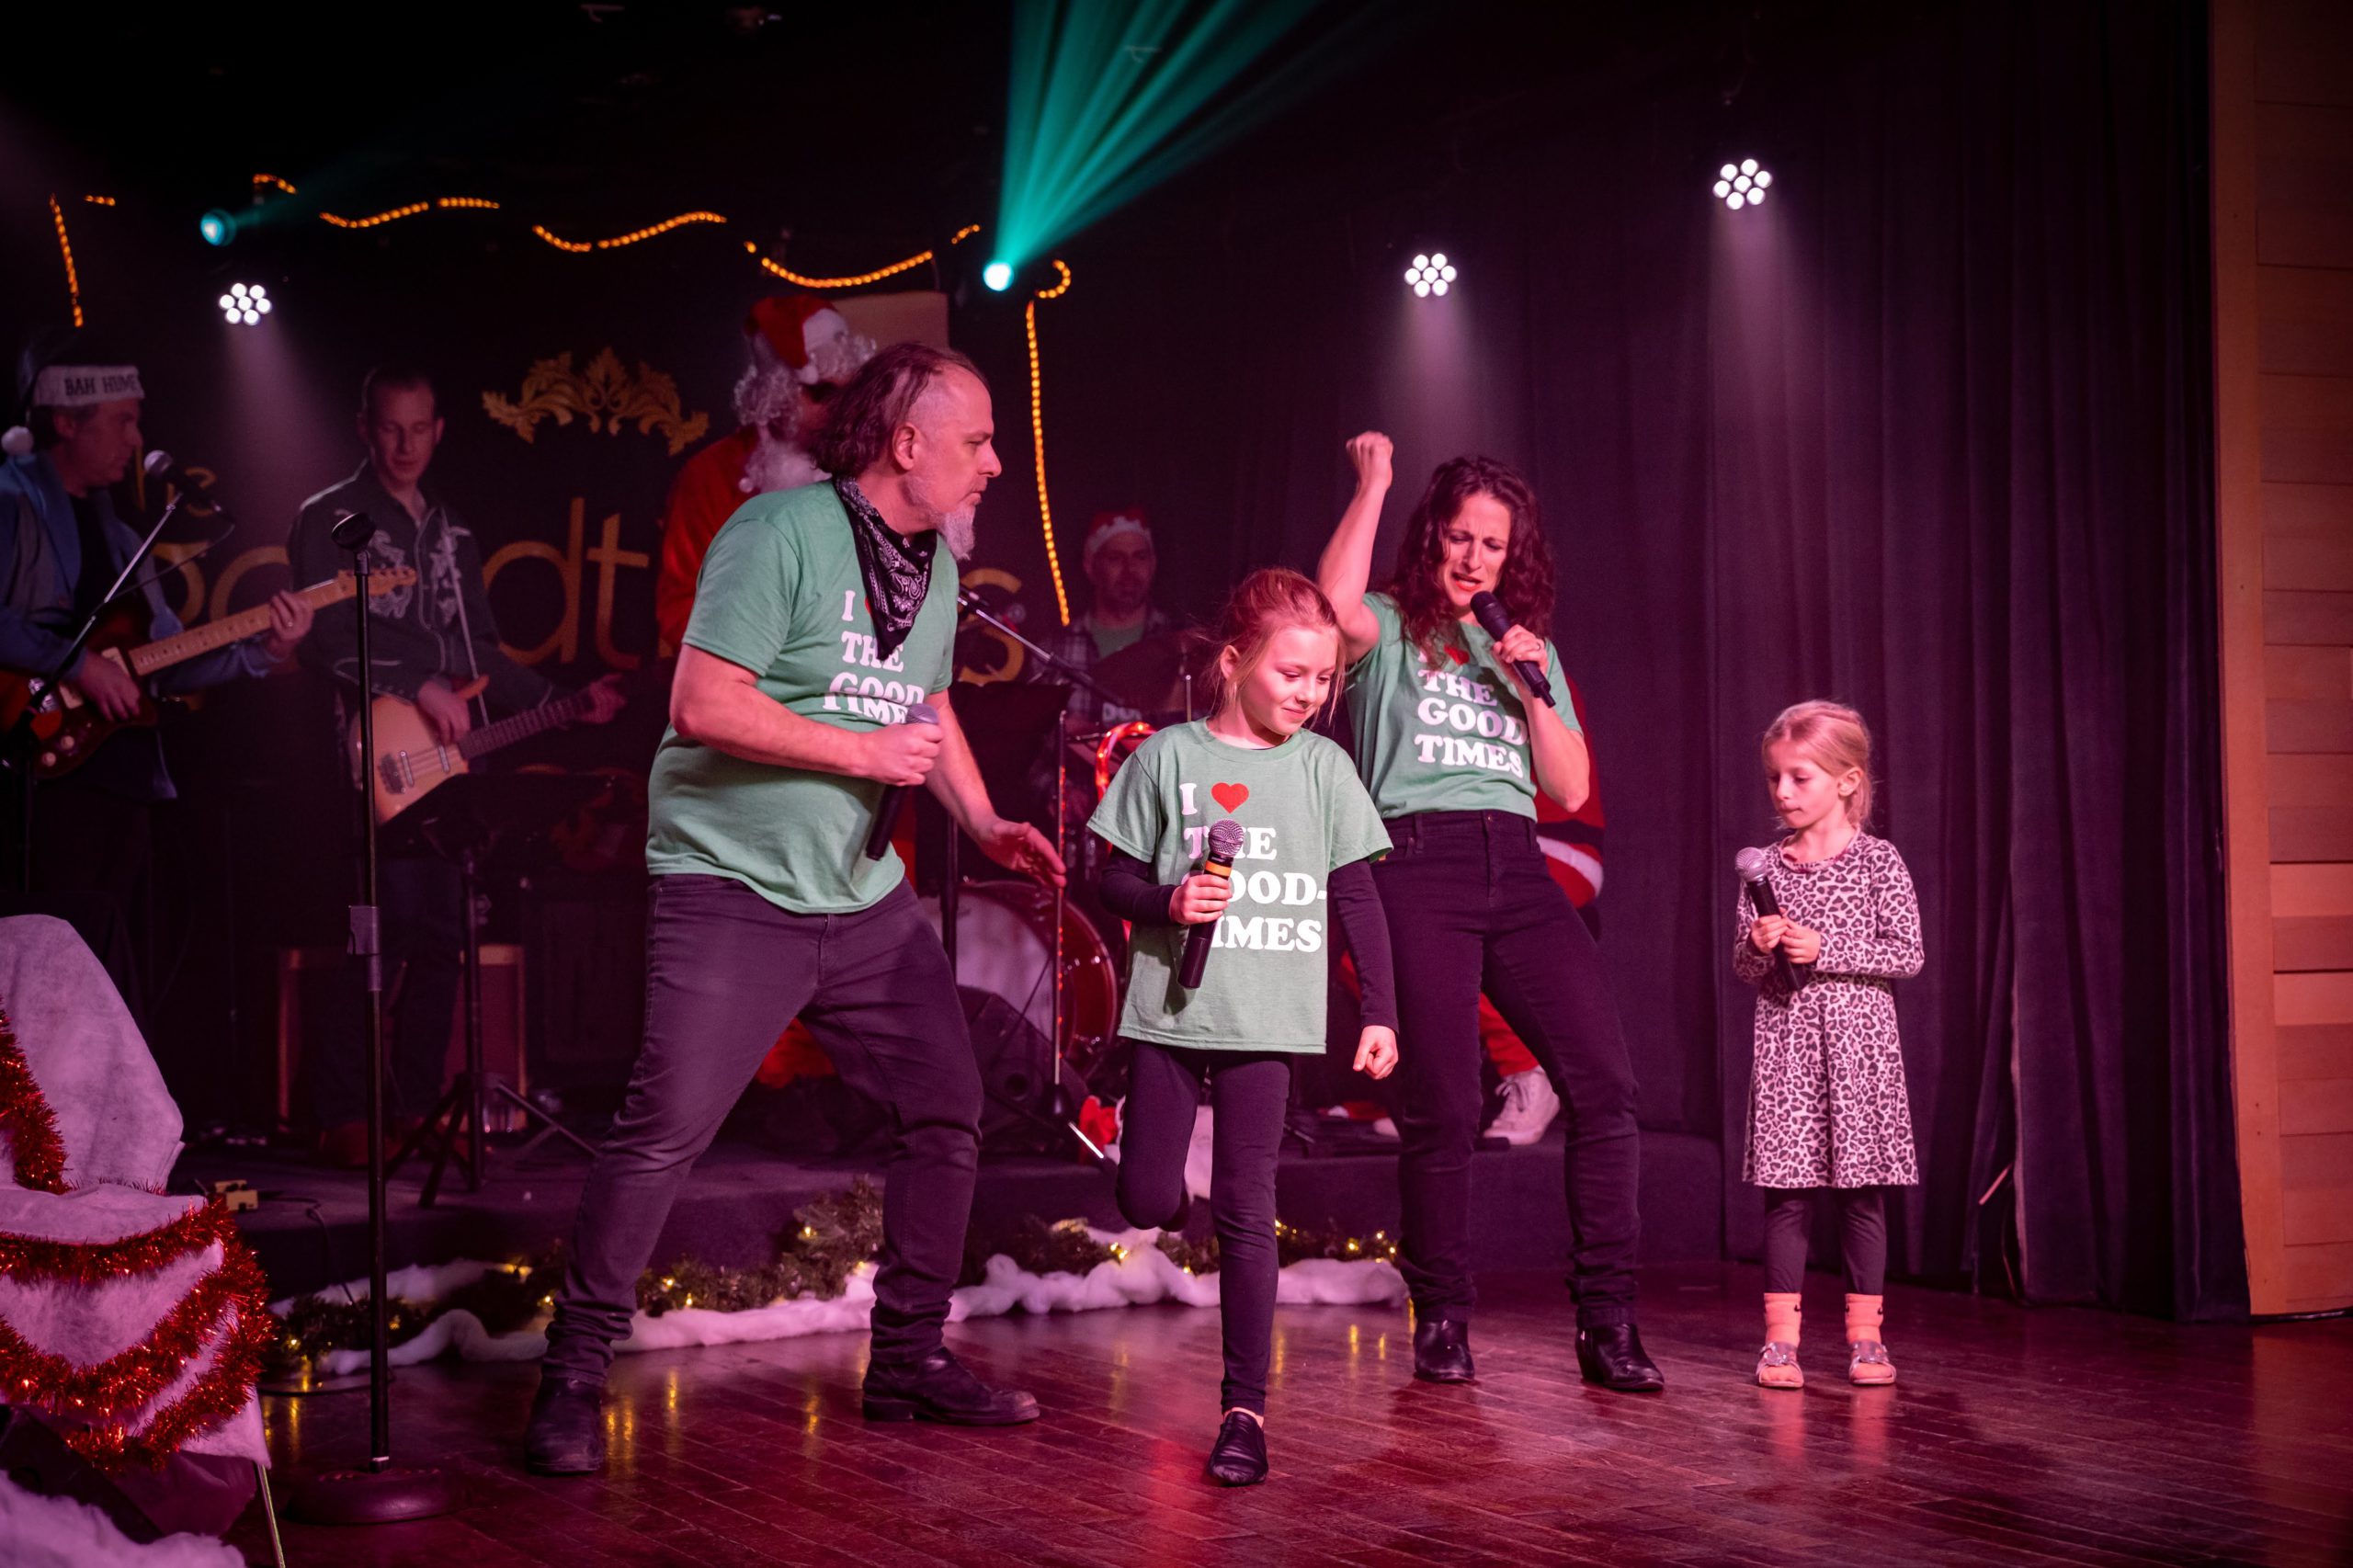 The Goodtimes perform their annual Christmas show at the Revival on College Street in 2019.